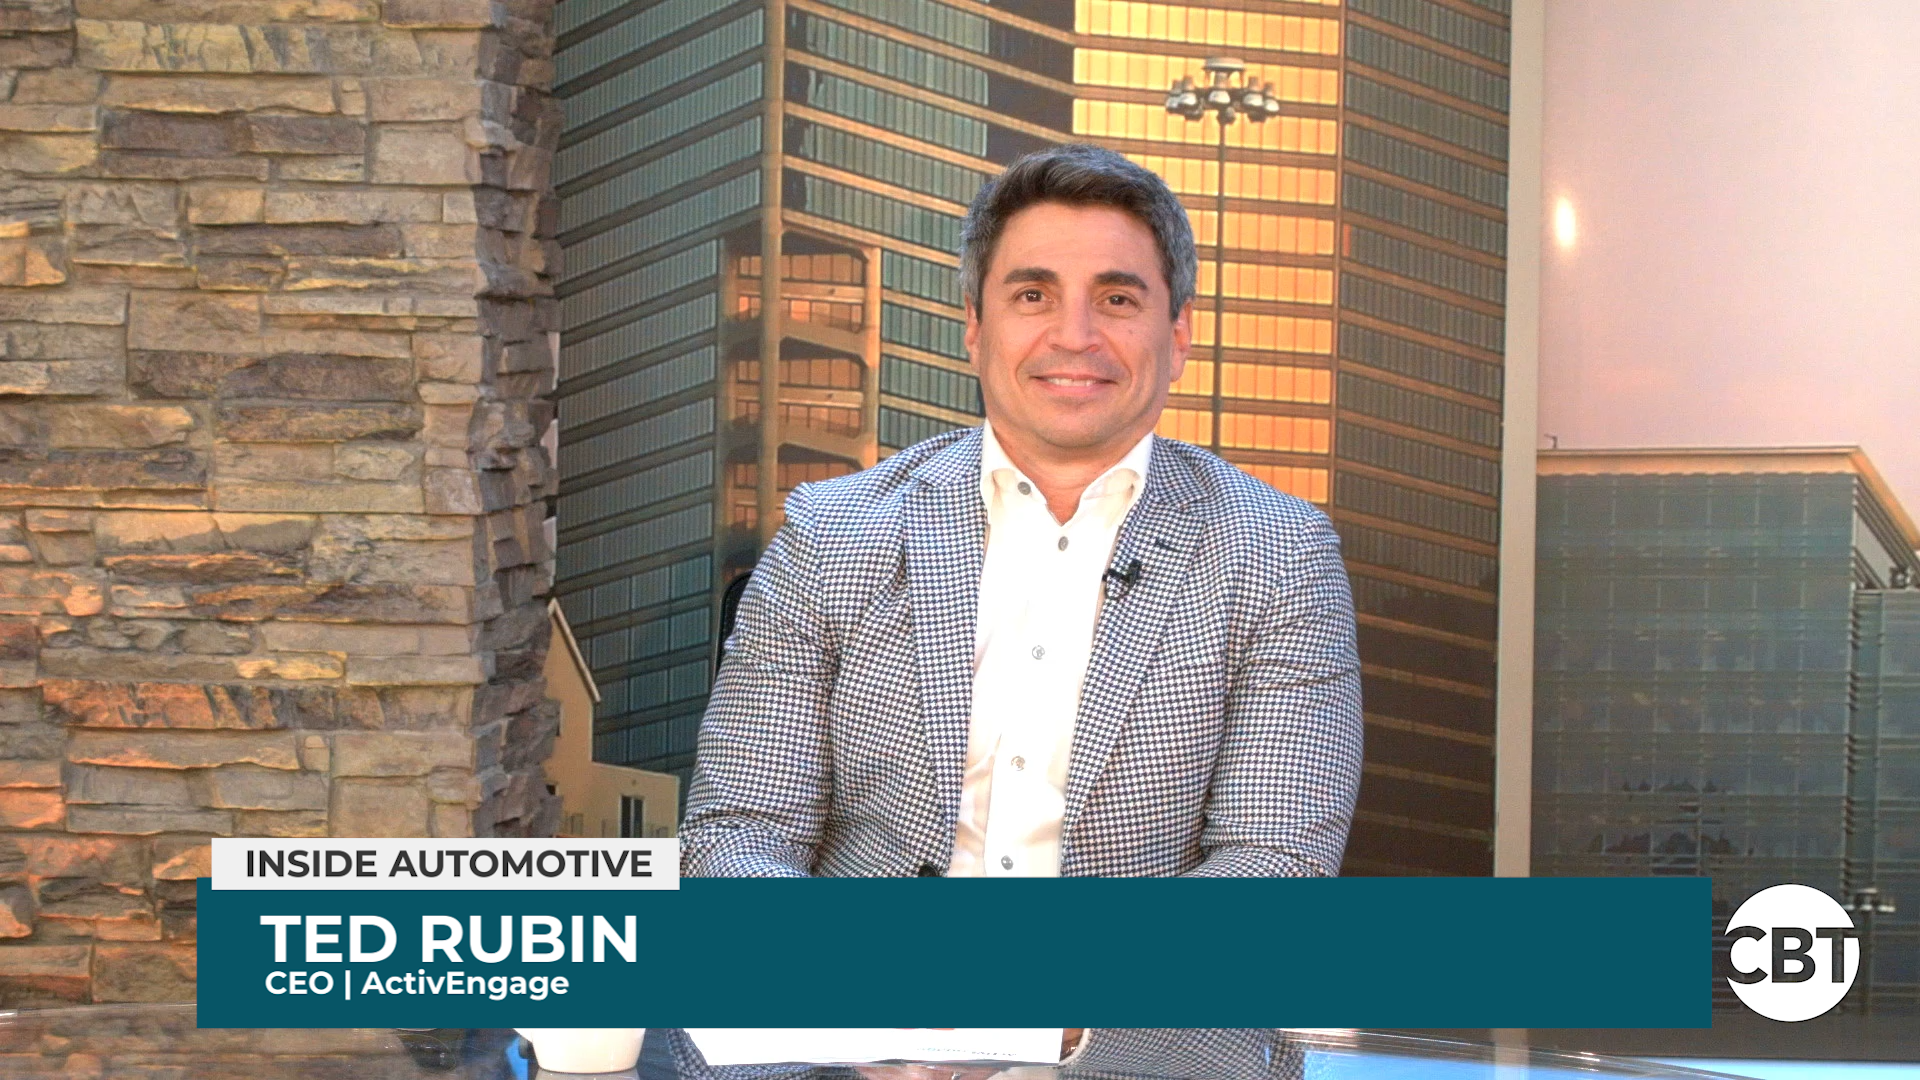 Ted Rubins joins Inside Automotive to discuss digital retailing in the dealership and how retailers can effectively communicate with customers